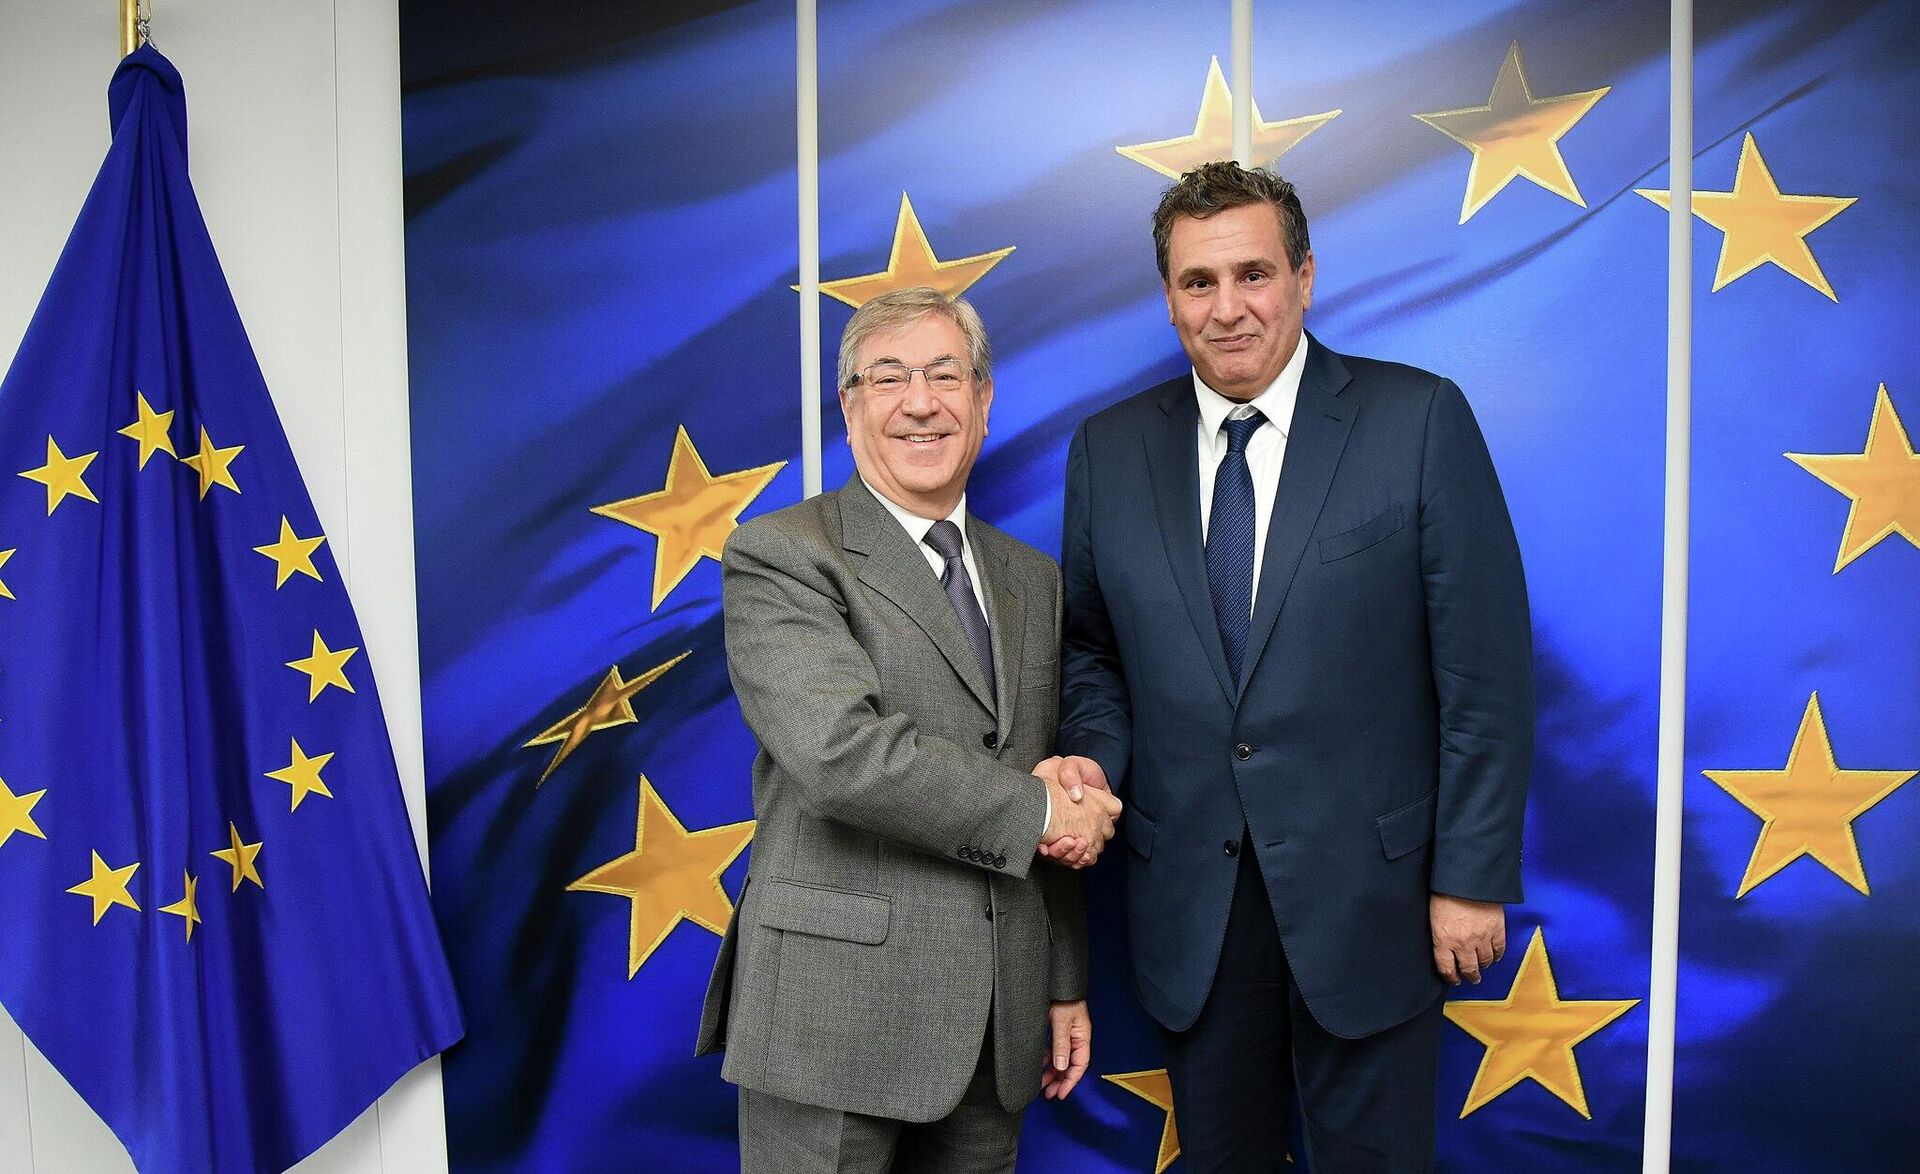 Visit of Aziz Akhannouch, Moroccan Minister for Agriculture, Maritime Fisheries, Rural Development and Water and Forests, to the European Commission on 23 January 2018 - Sputnik International, 1920, 23.09.2021